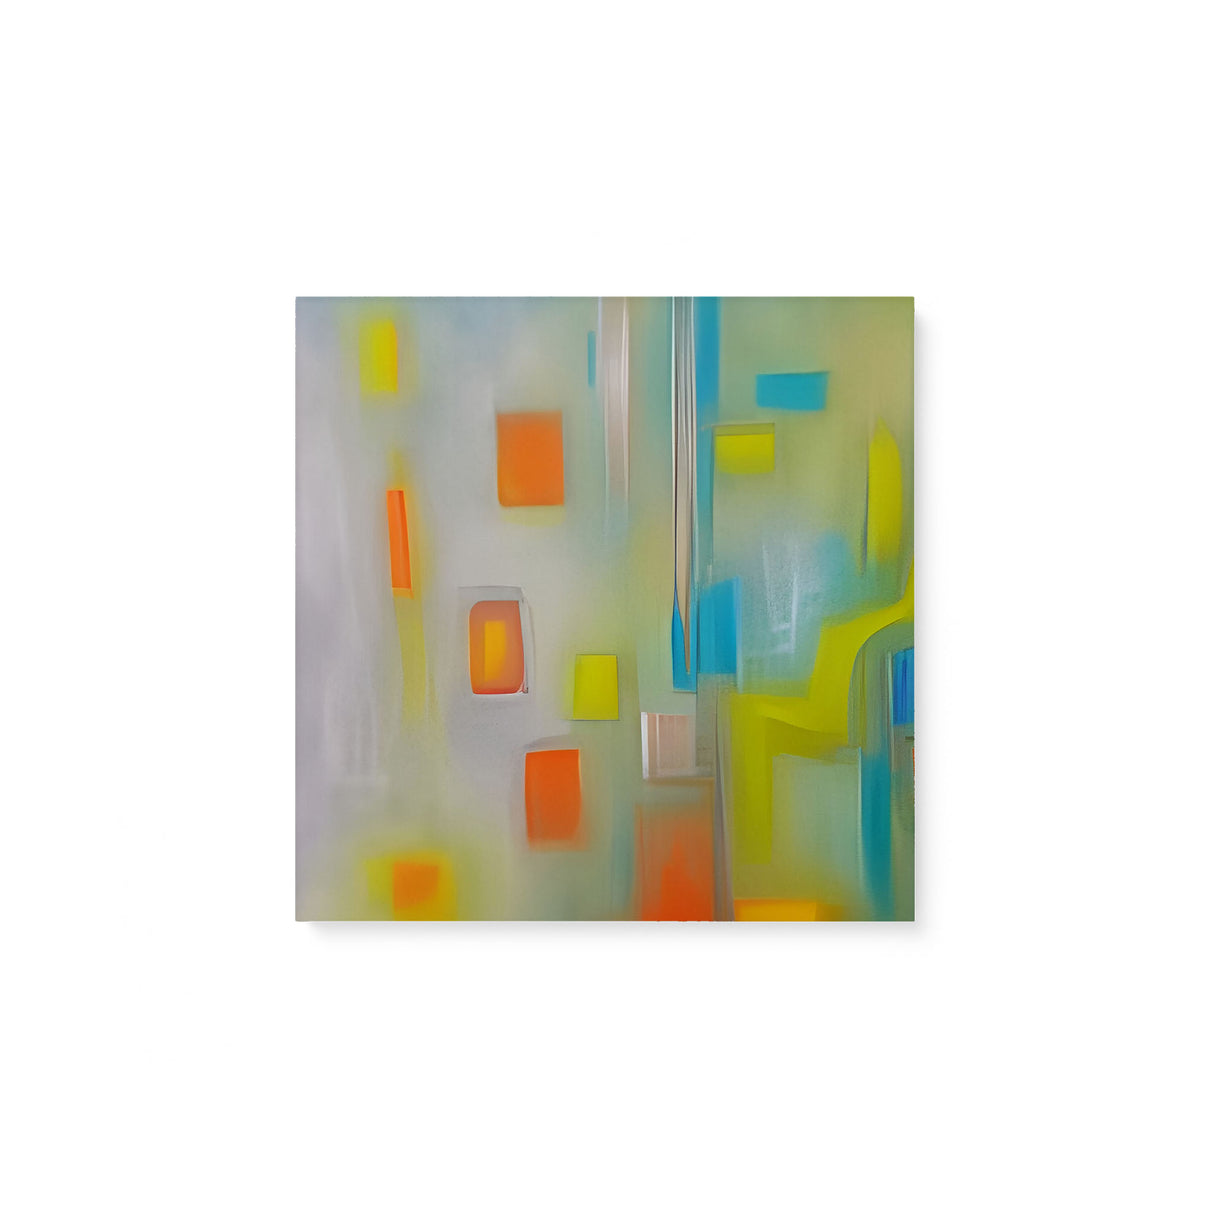 Bright Colorful Abstract Wall Art Canvas {Happy Art} Canvas Wall Art Sckribbles 8x8  